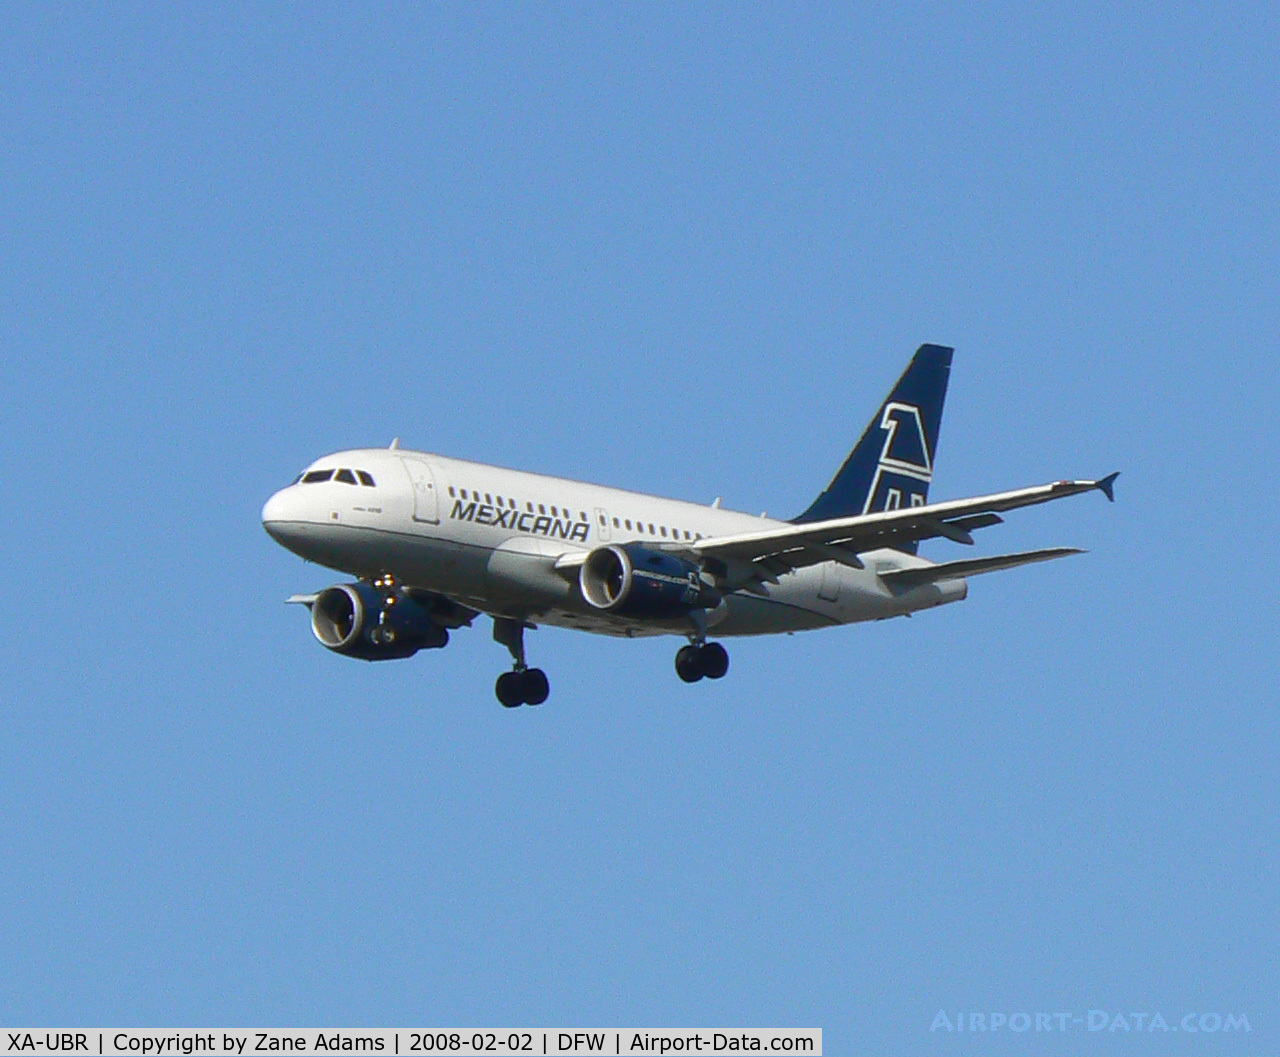 XA-UBR, 2004 Airbus A318-111 C/N 2333, Mexicana Airlines at DFW